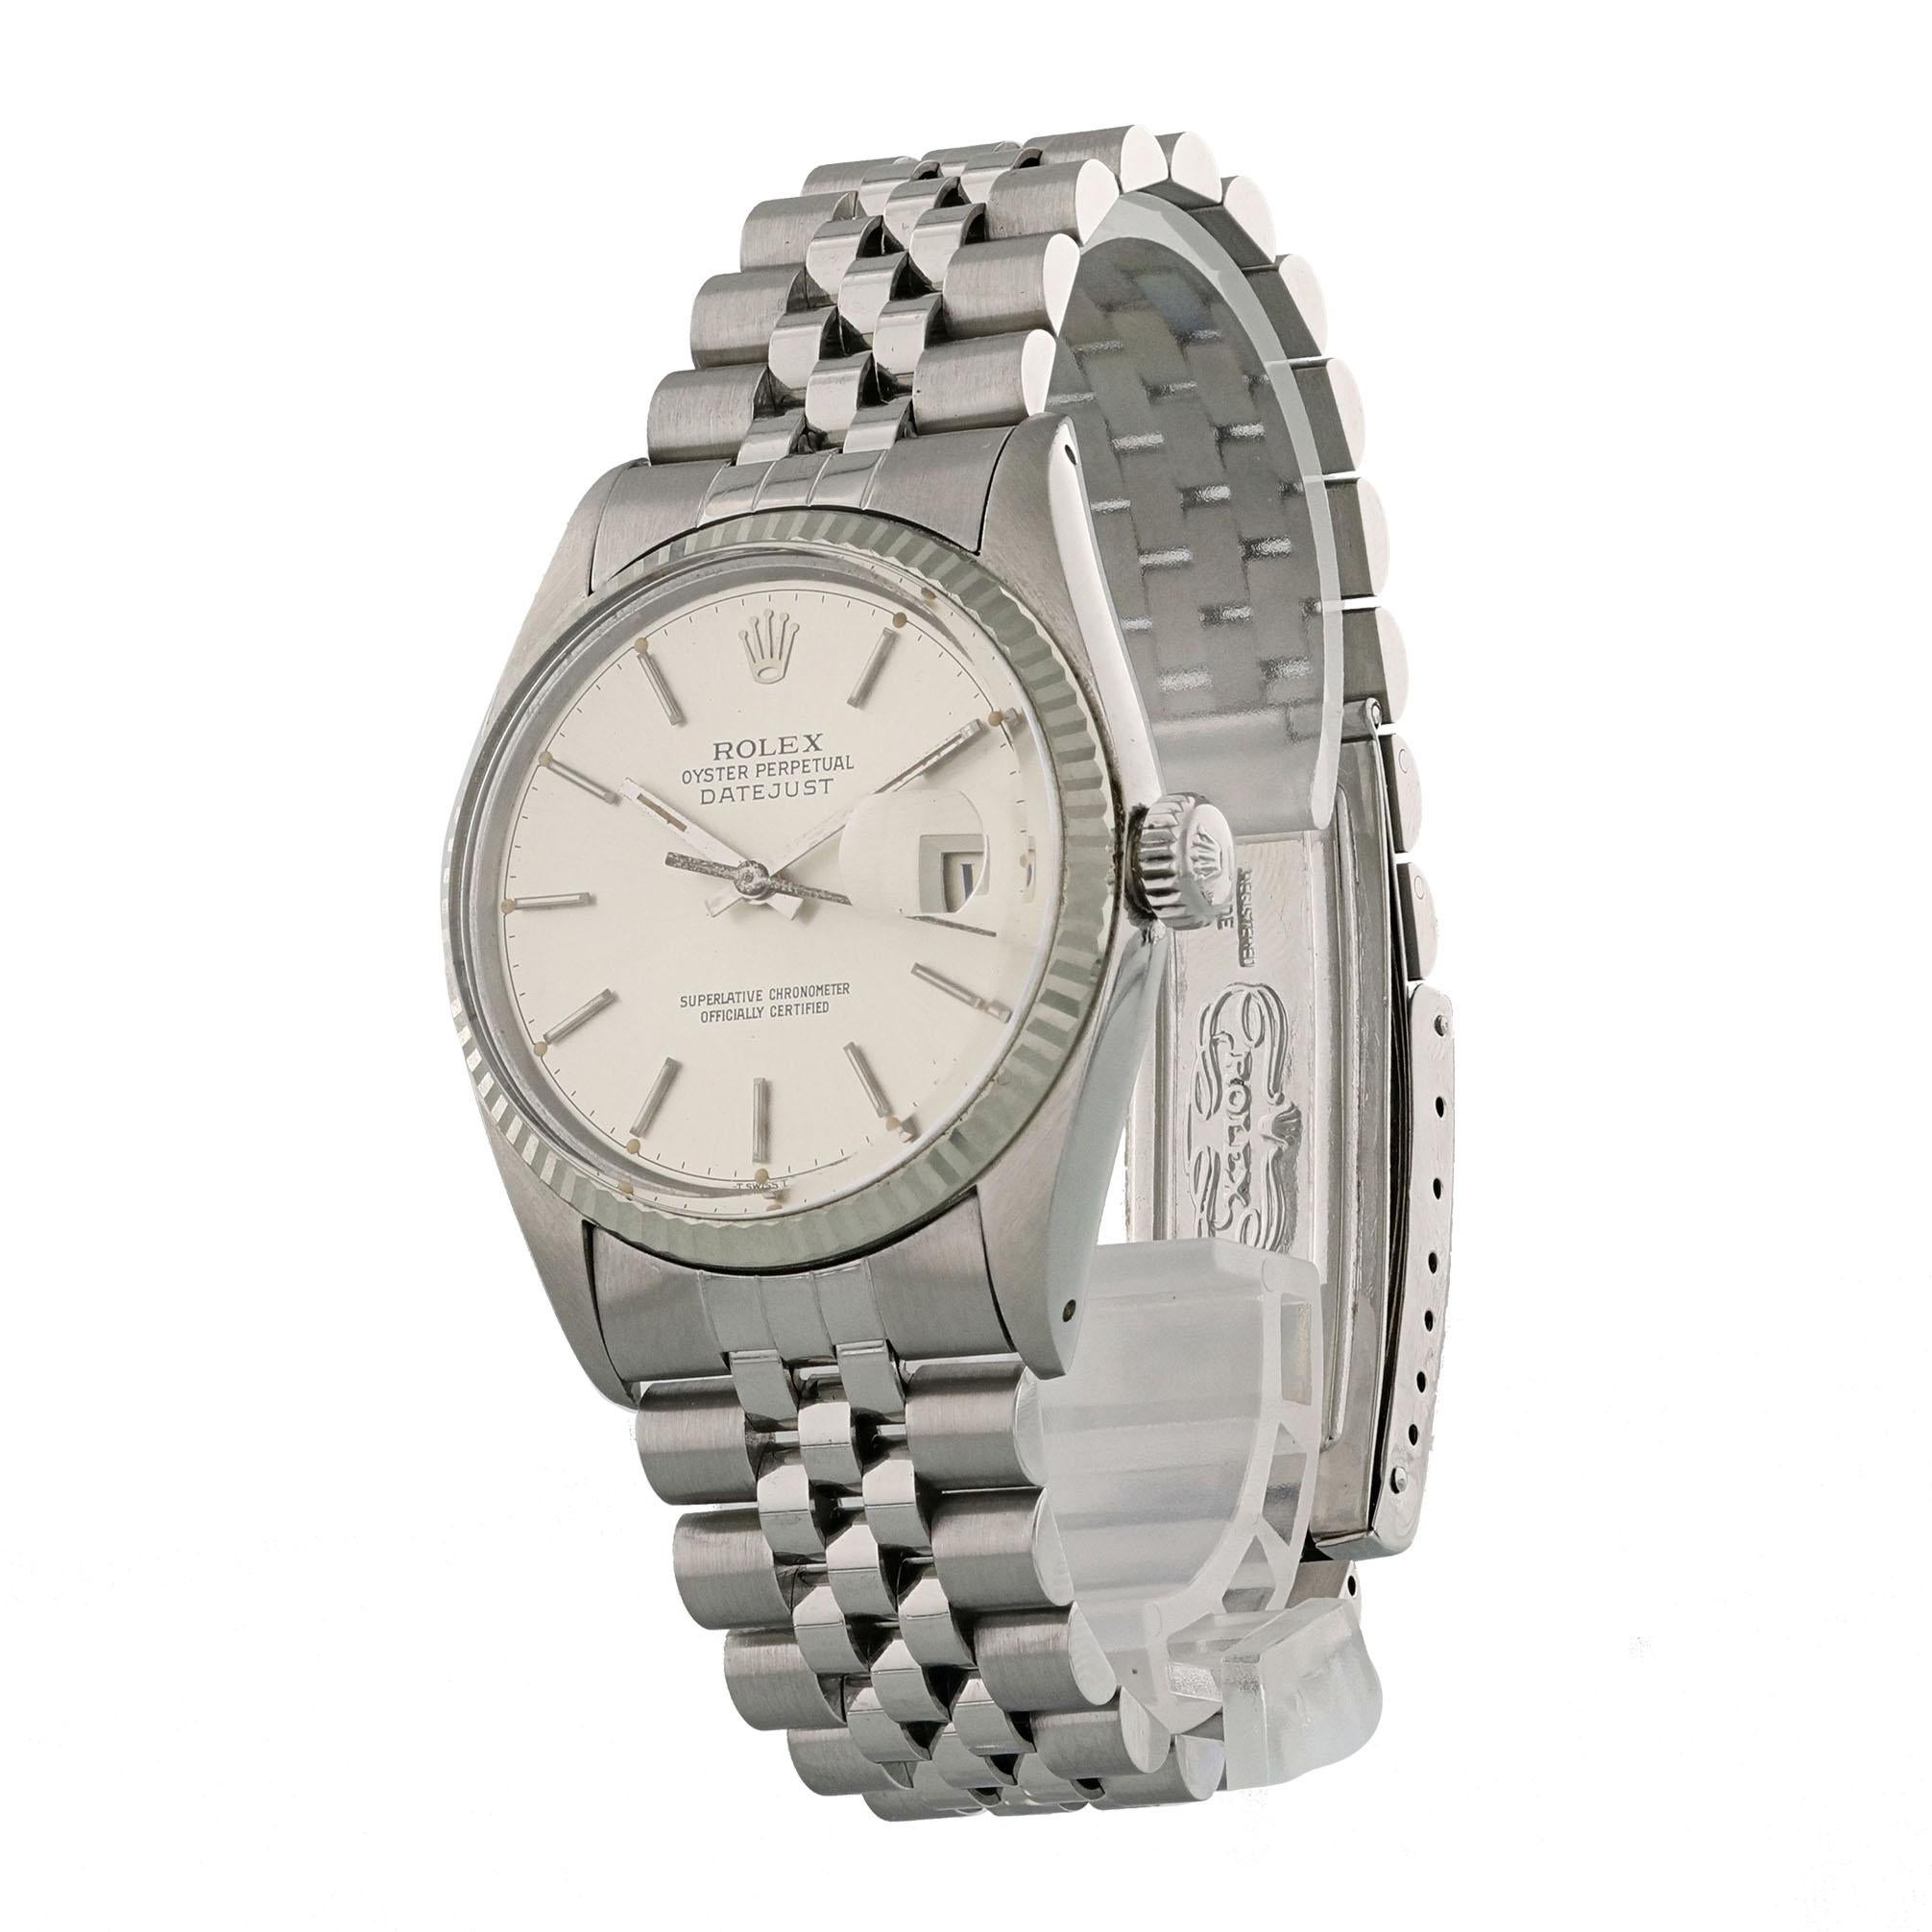 Rolex Datejust 16014 Dial Men's Watch.
36mm Stainless Steel case. 
White Gold fluted bezel. 
Silver dial with steel hands and index hour markers. 
Minute markers on the outer dial. 
Date display at the 3 o'clock position. 
Stainless Steel Bracelet